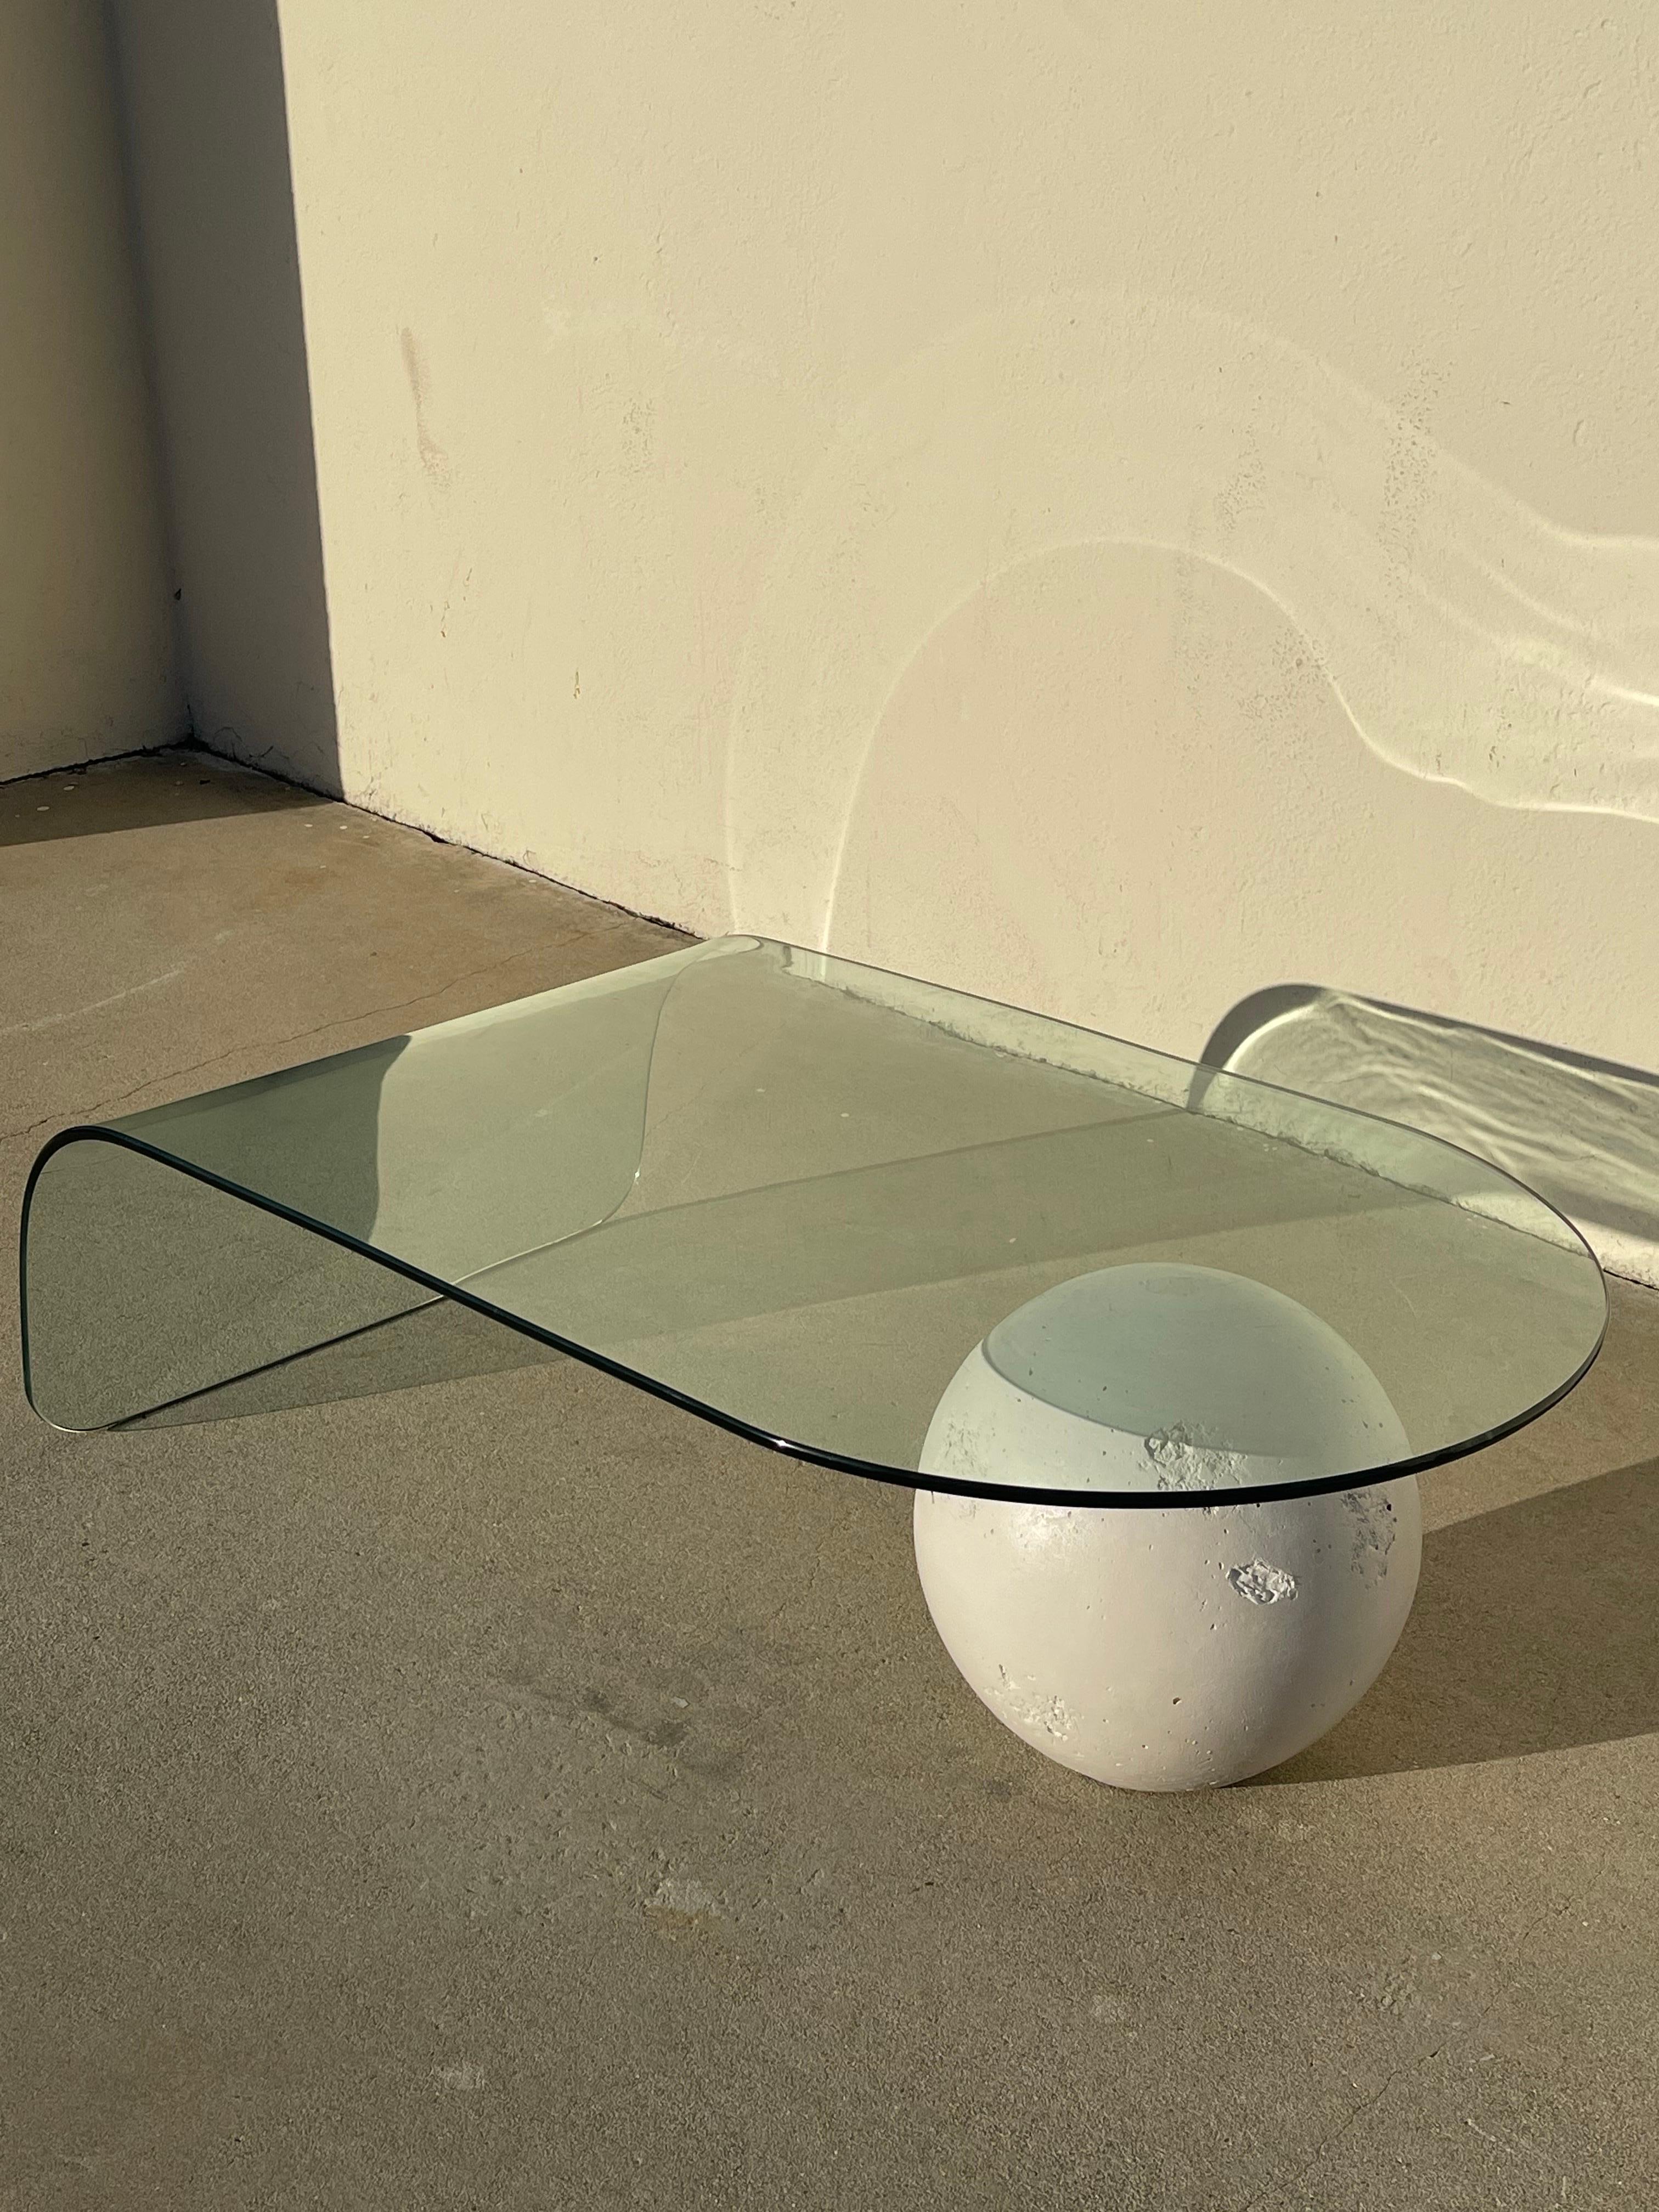 Glass coffee table with a waterfall edge and plaster ball. Origin: USA circa 1980’s. In excellent condition with minor wear consistent with age and use.